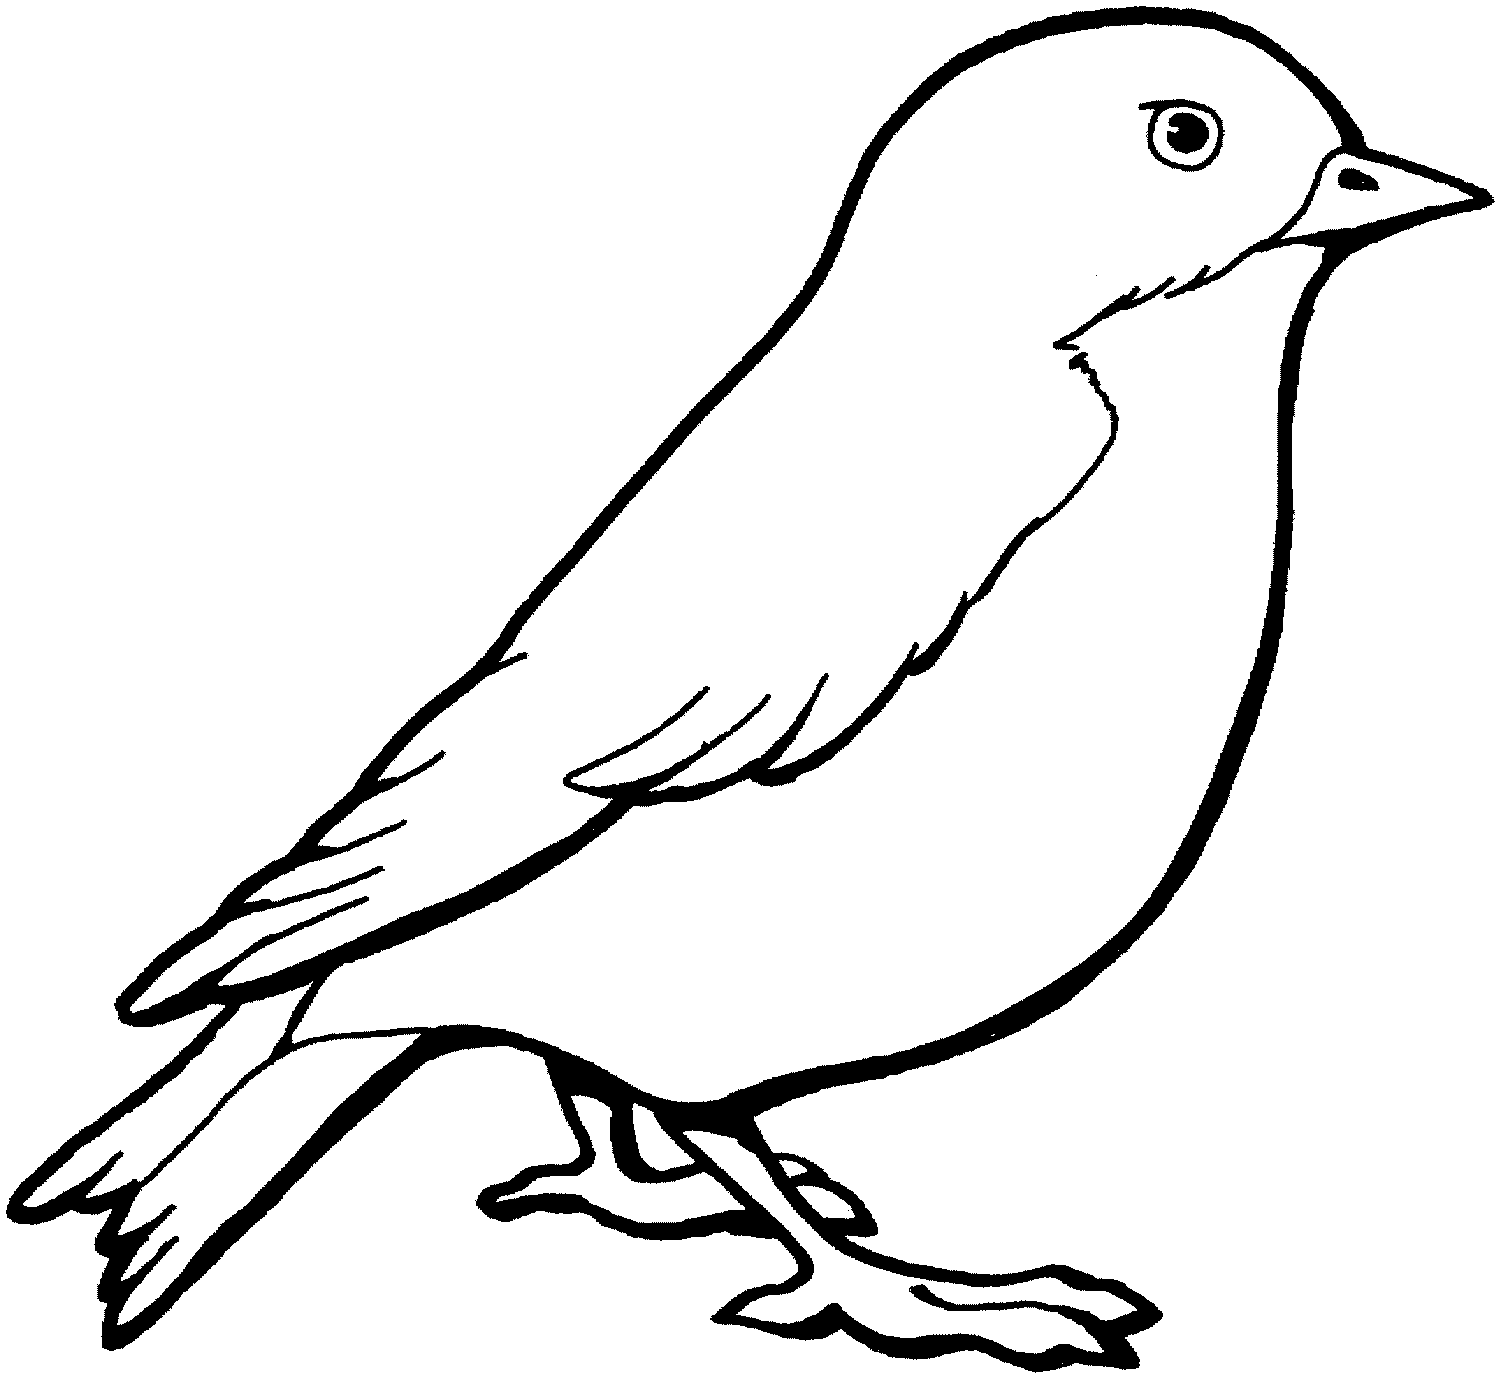 colouring pages for birds feeding birds coloring pages bird activity for birds colouring pages 